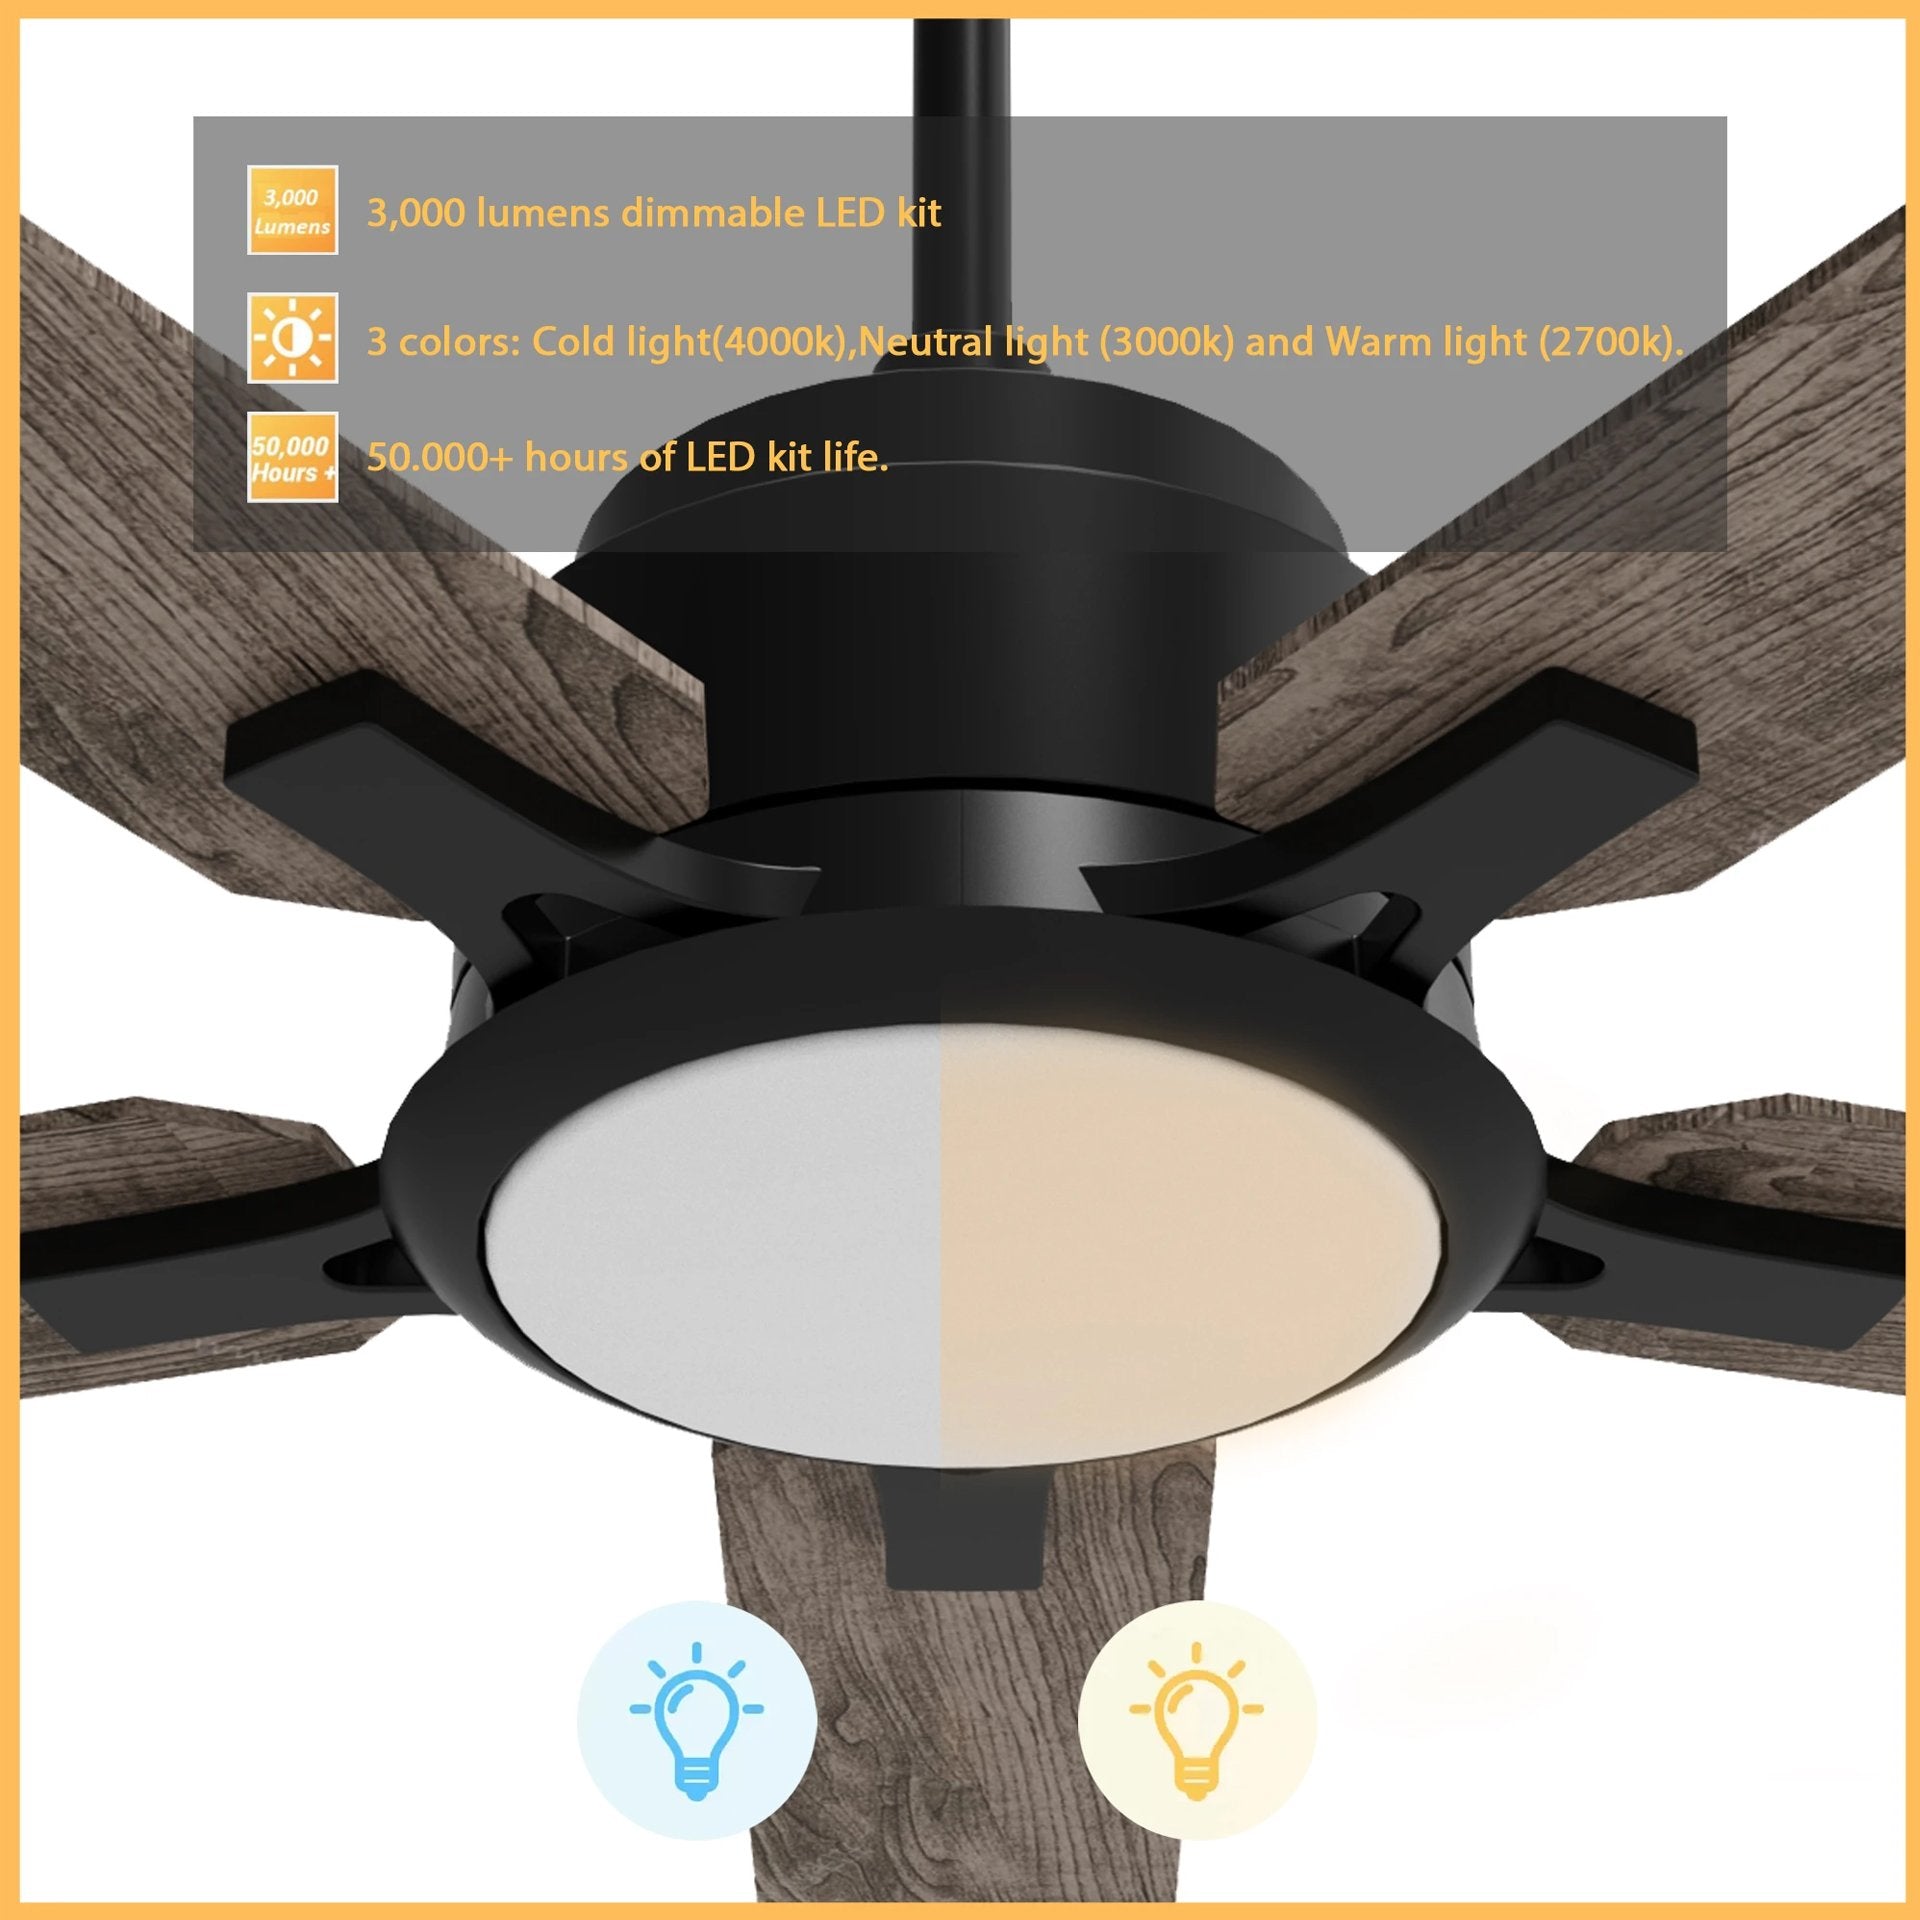 Essex 52'' Best Smart Ceiling Fan with Remote, Light Kit Included, Works with Google Assistant and Amazon Alexa,Siri Shortcut